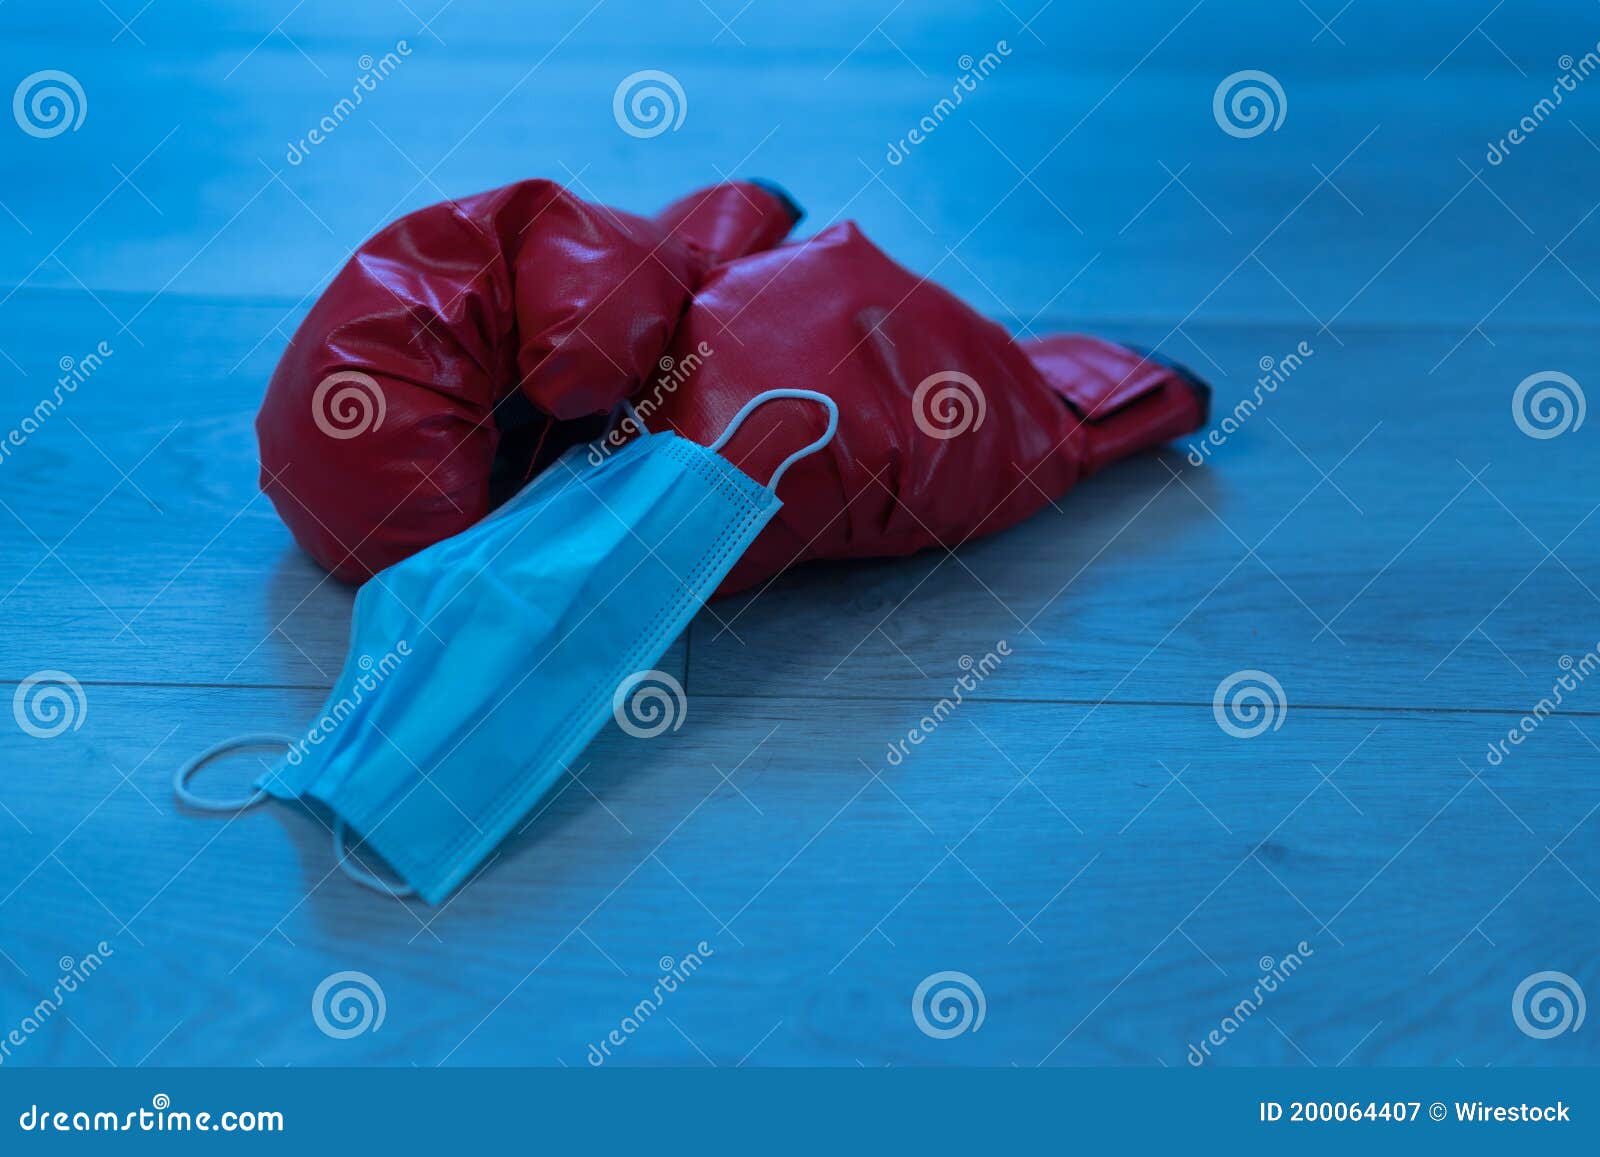 red leather boxing gloves and a medical mask on a wooden background - pandemic sports concept